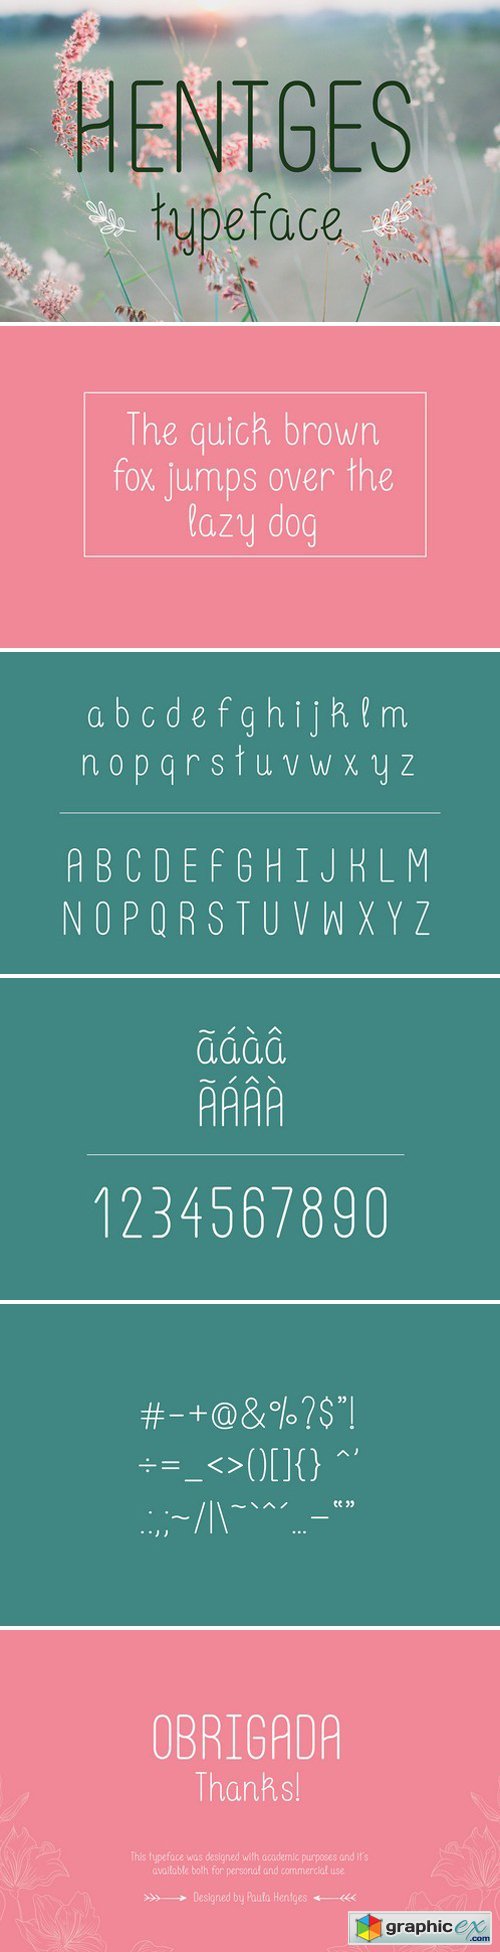 Hentges Typeface